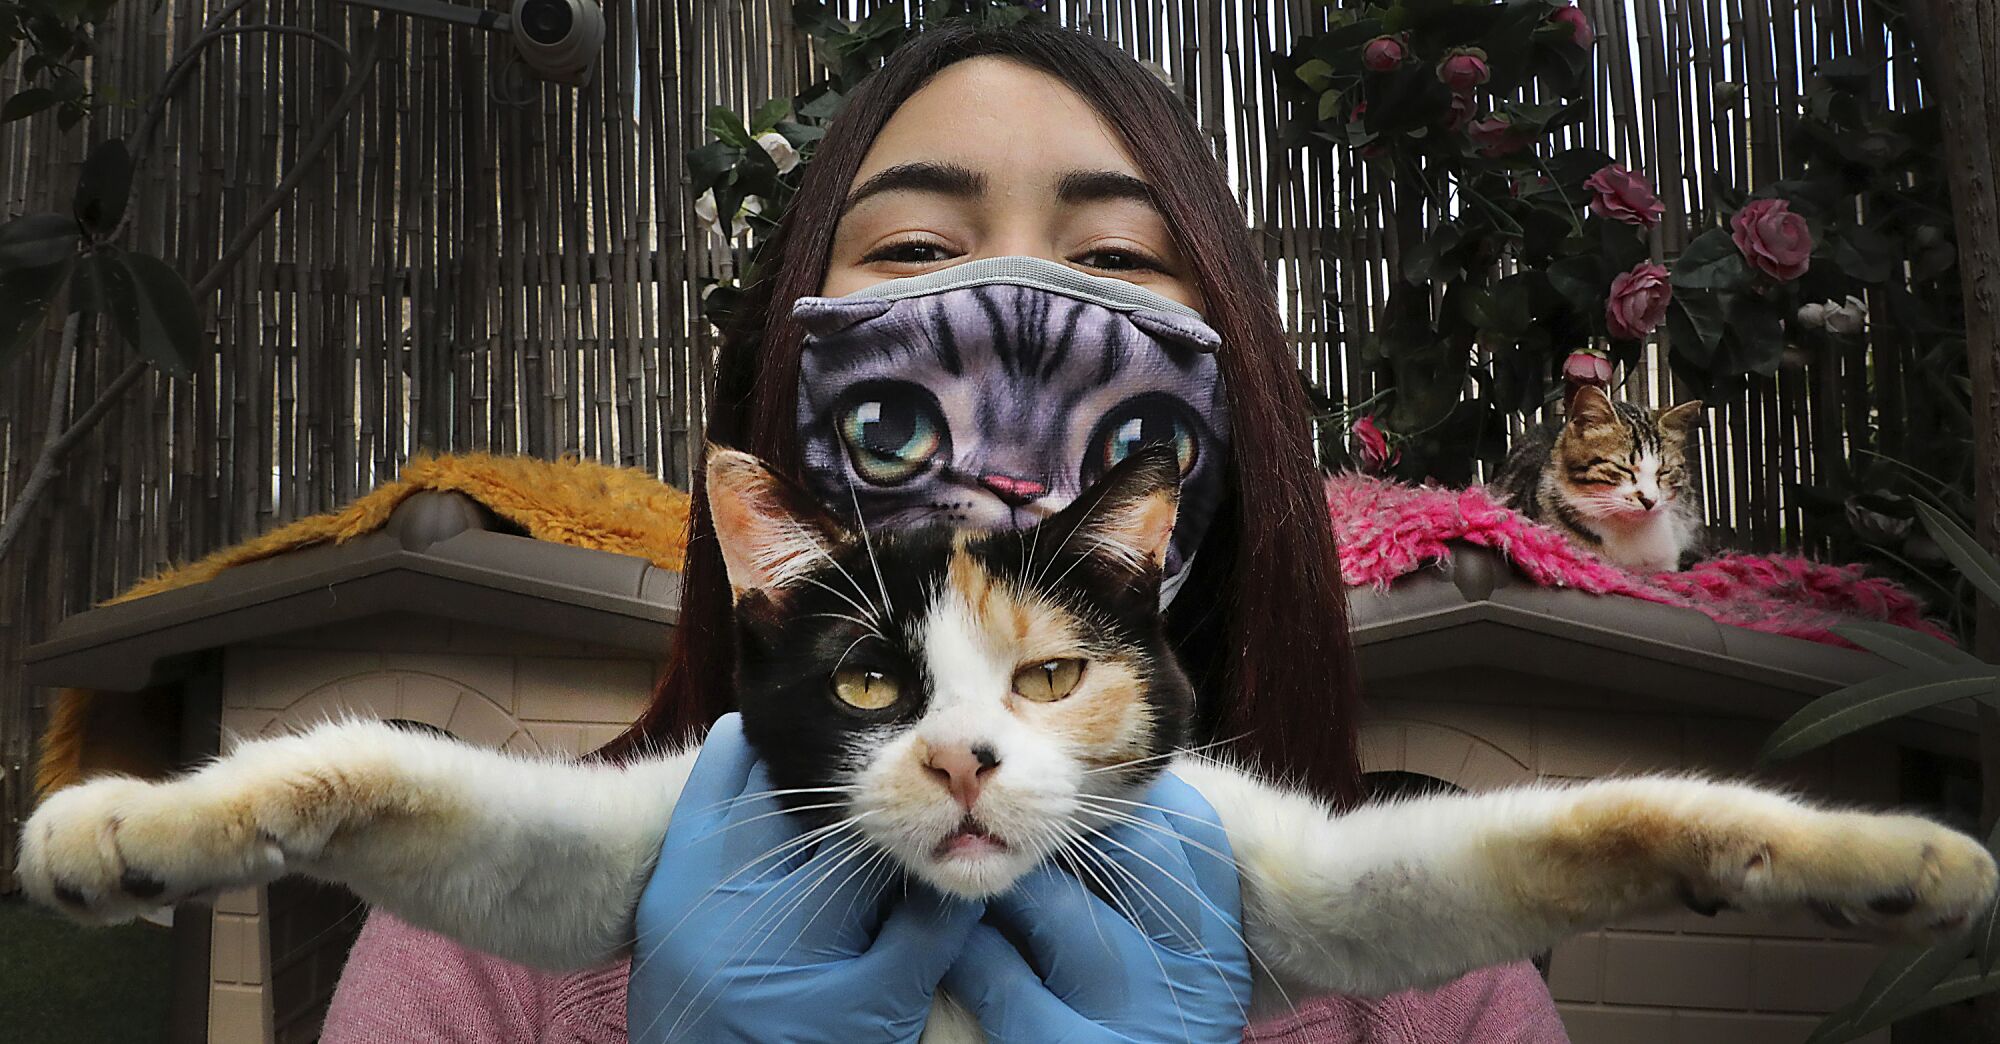 WEST BANK: Hiba Junaidi, wearing protective gloves and a mask amid the coronavirus outbreak, poses with one of the stray cats she cares for in her house's backyard, which she had turned into a shelter, near the West Bank city of Hebron, on April 7.